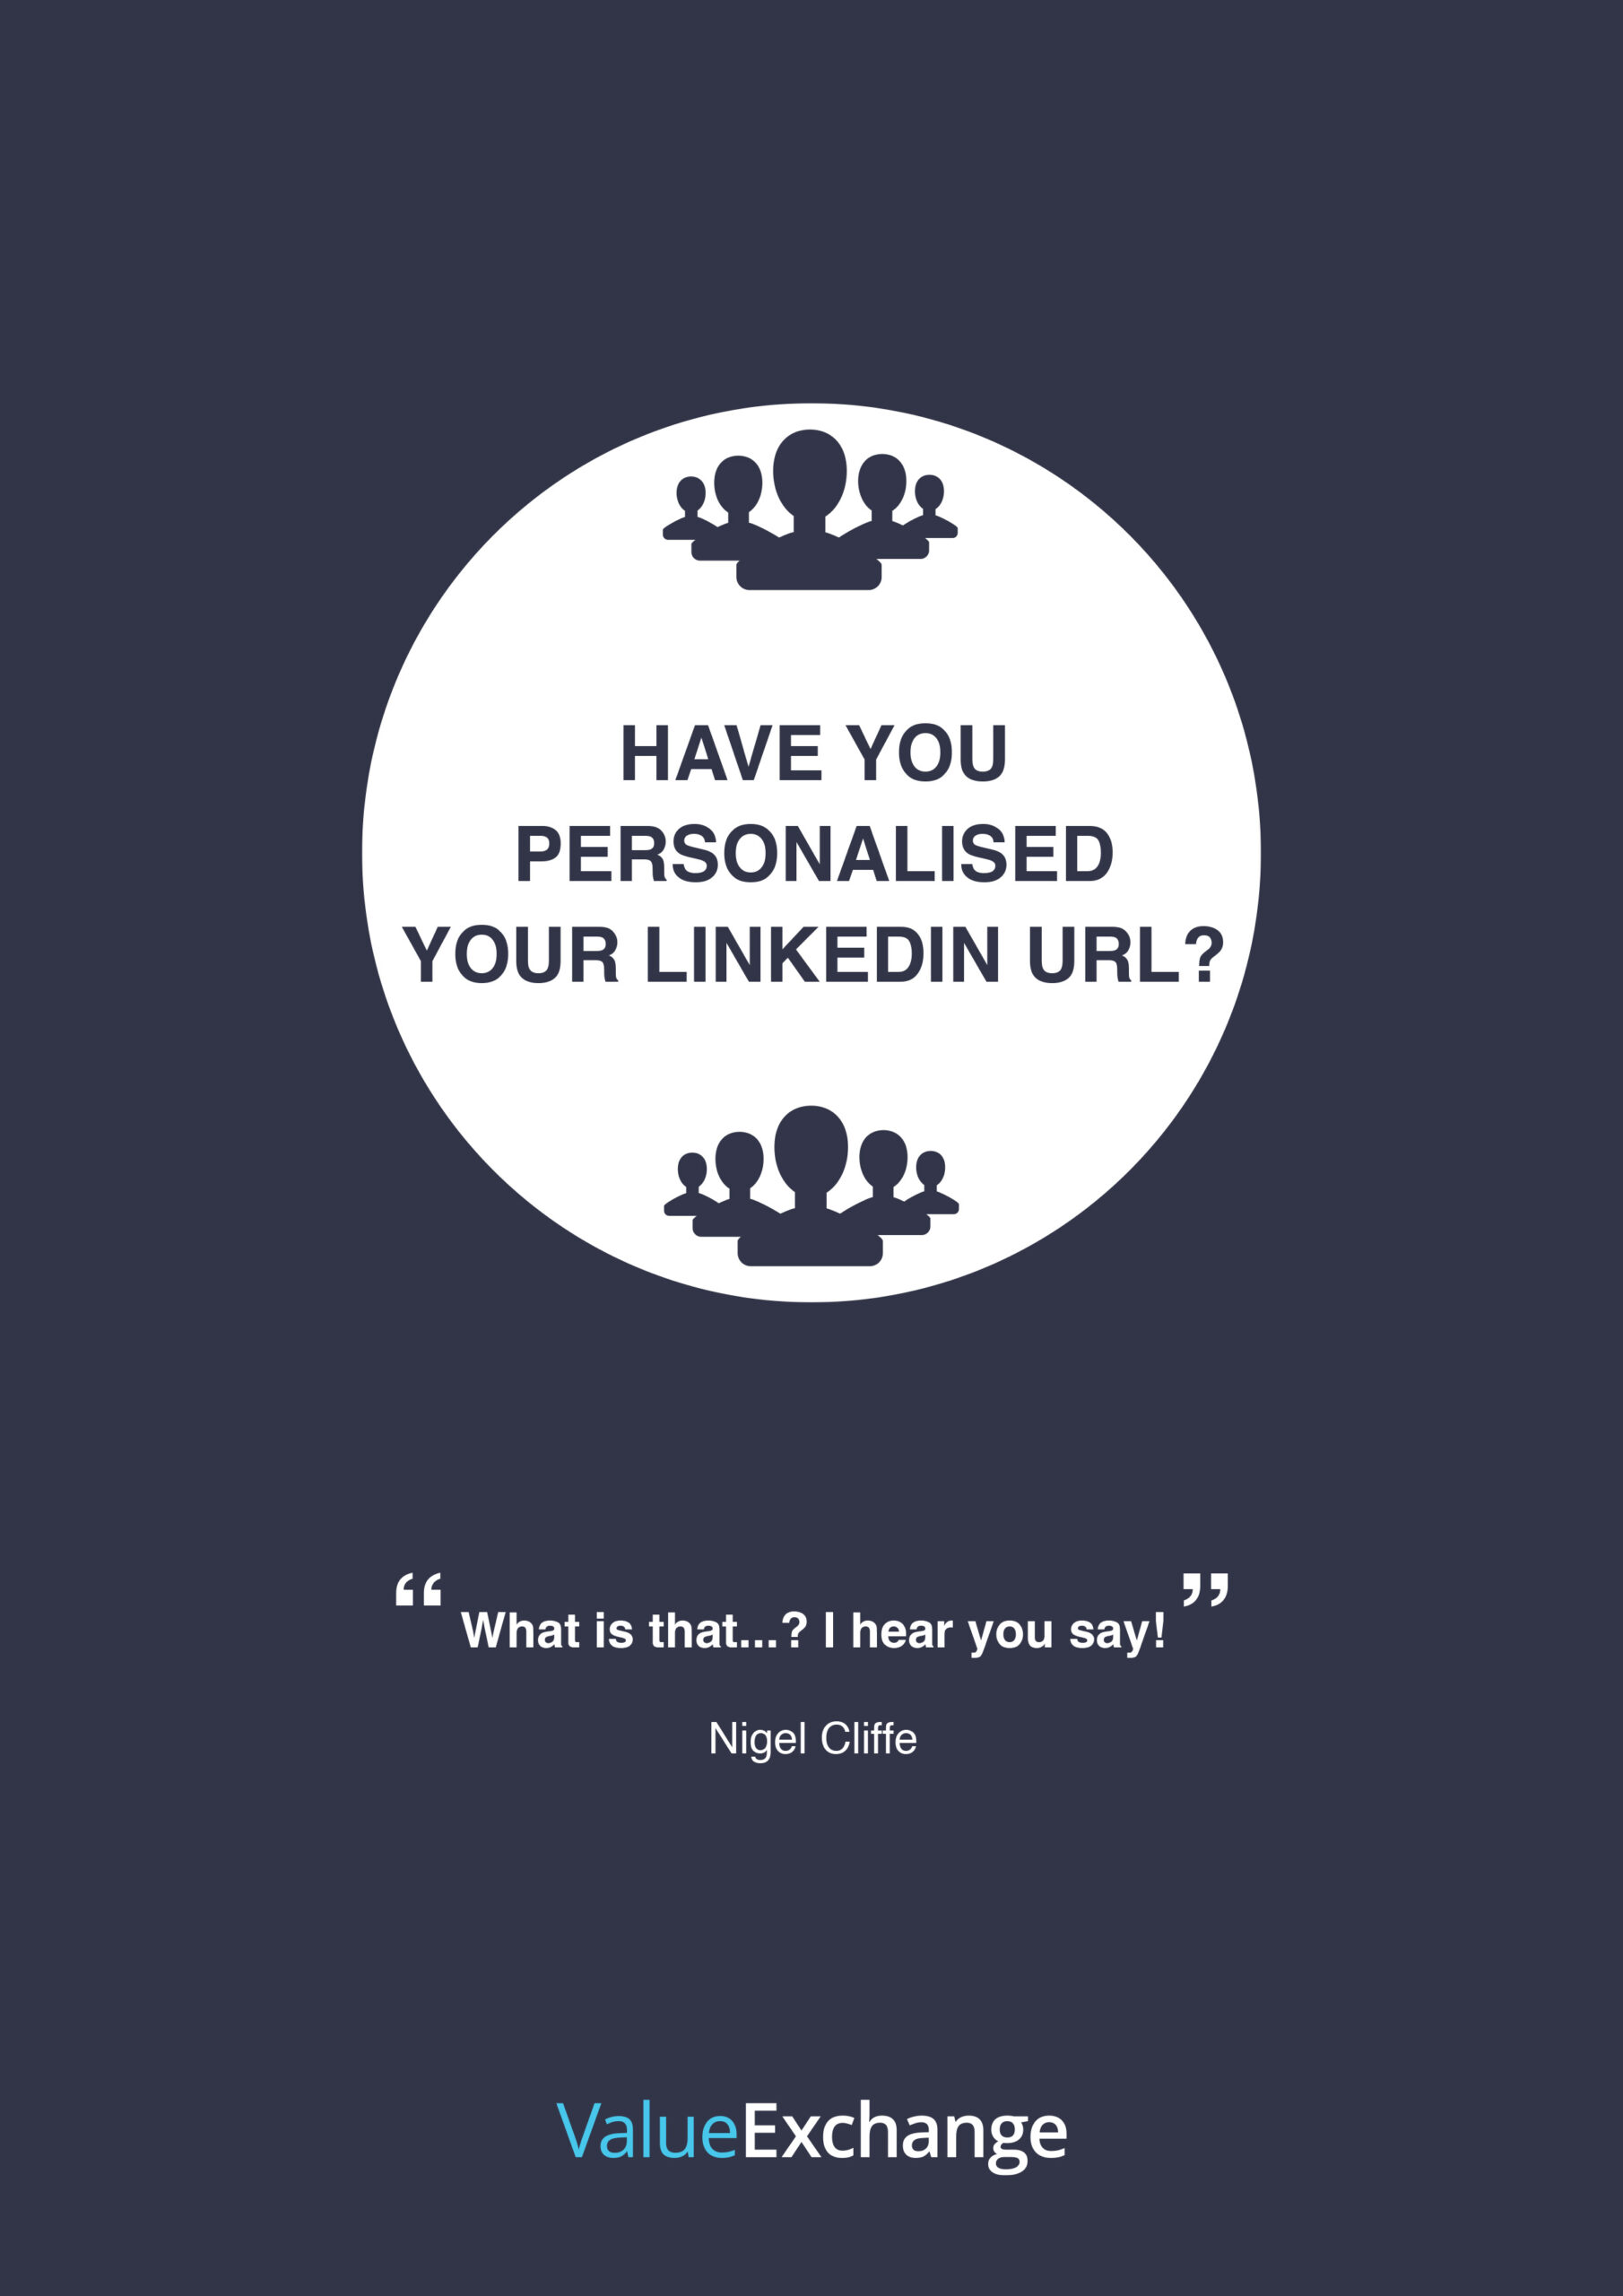 Have You Personalised Your LinkedIn URL resource by Nigel Cliffe